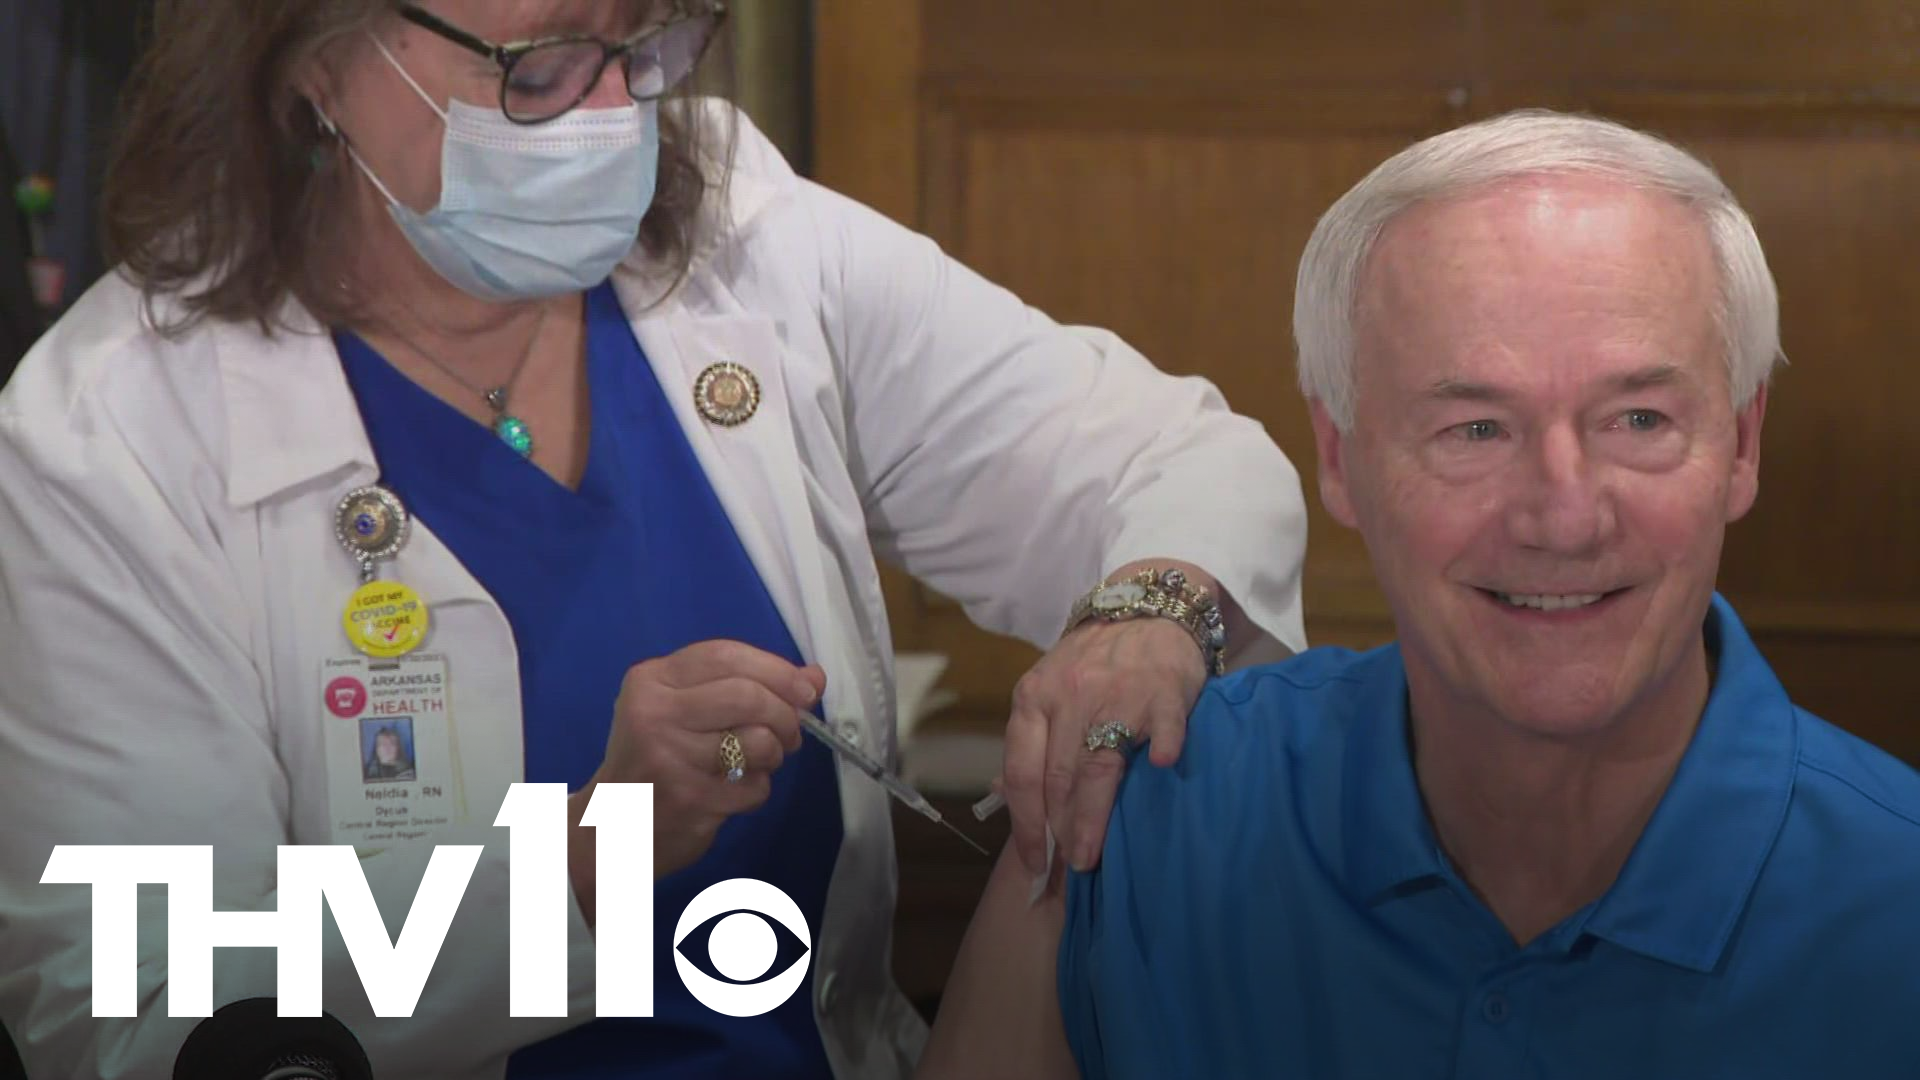 Arkansas Governor Asa Hutchinson received his COVID-19 booster shot at the beginning of his weekly press conference.